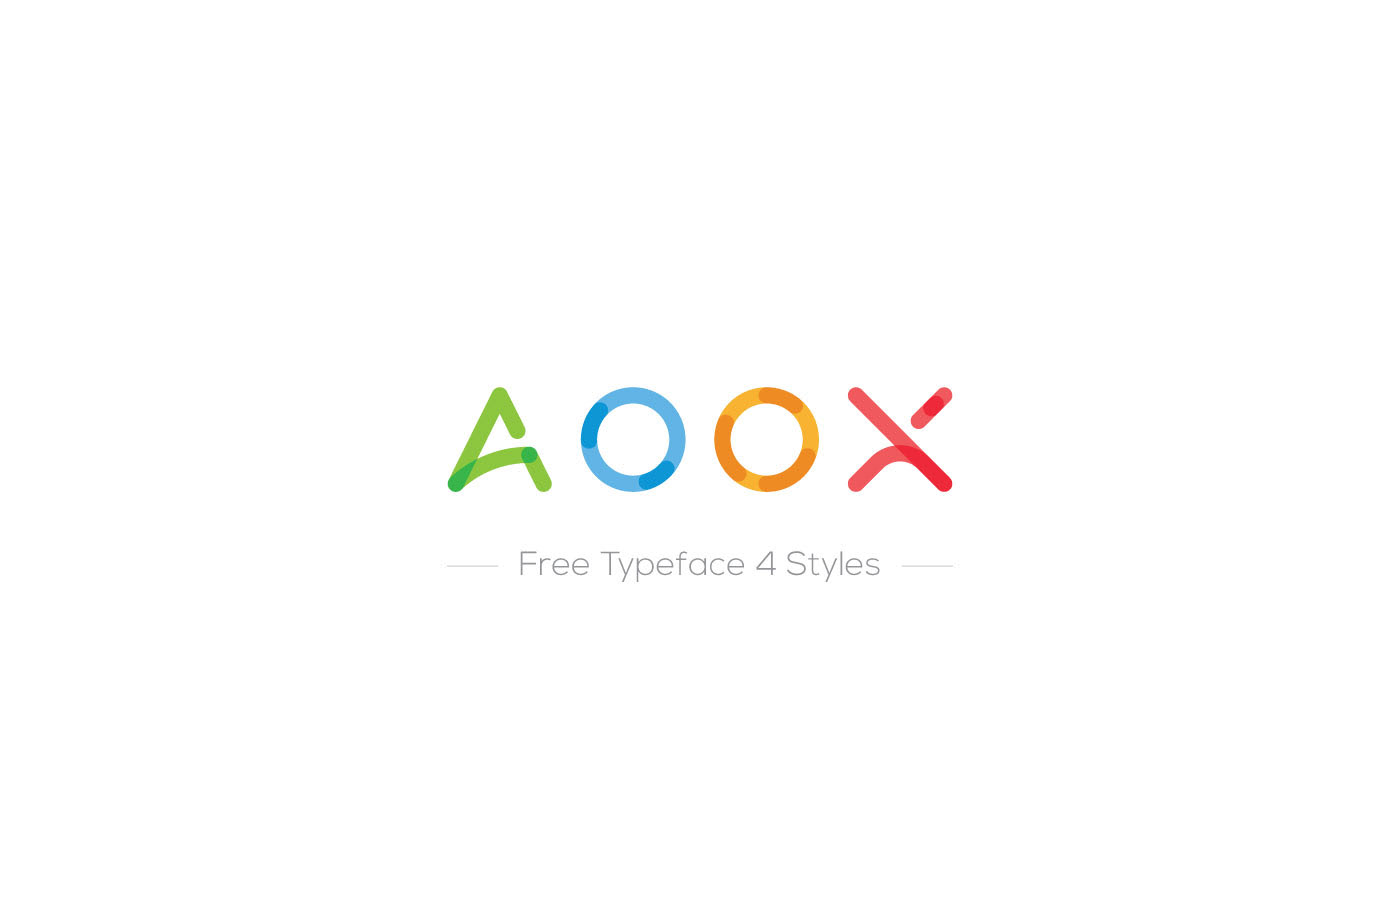 A free typeface in four styles